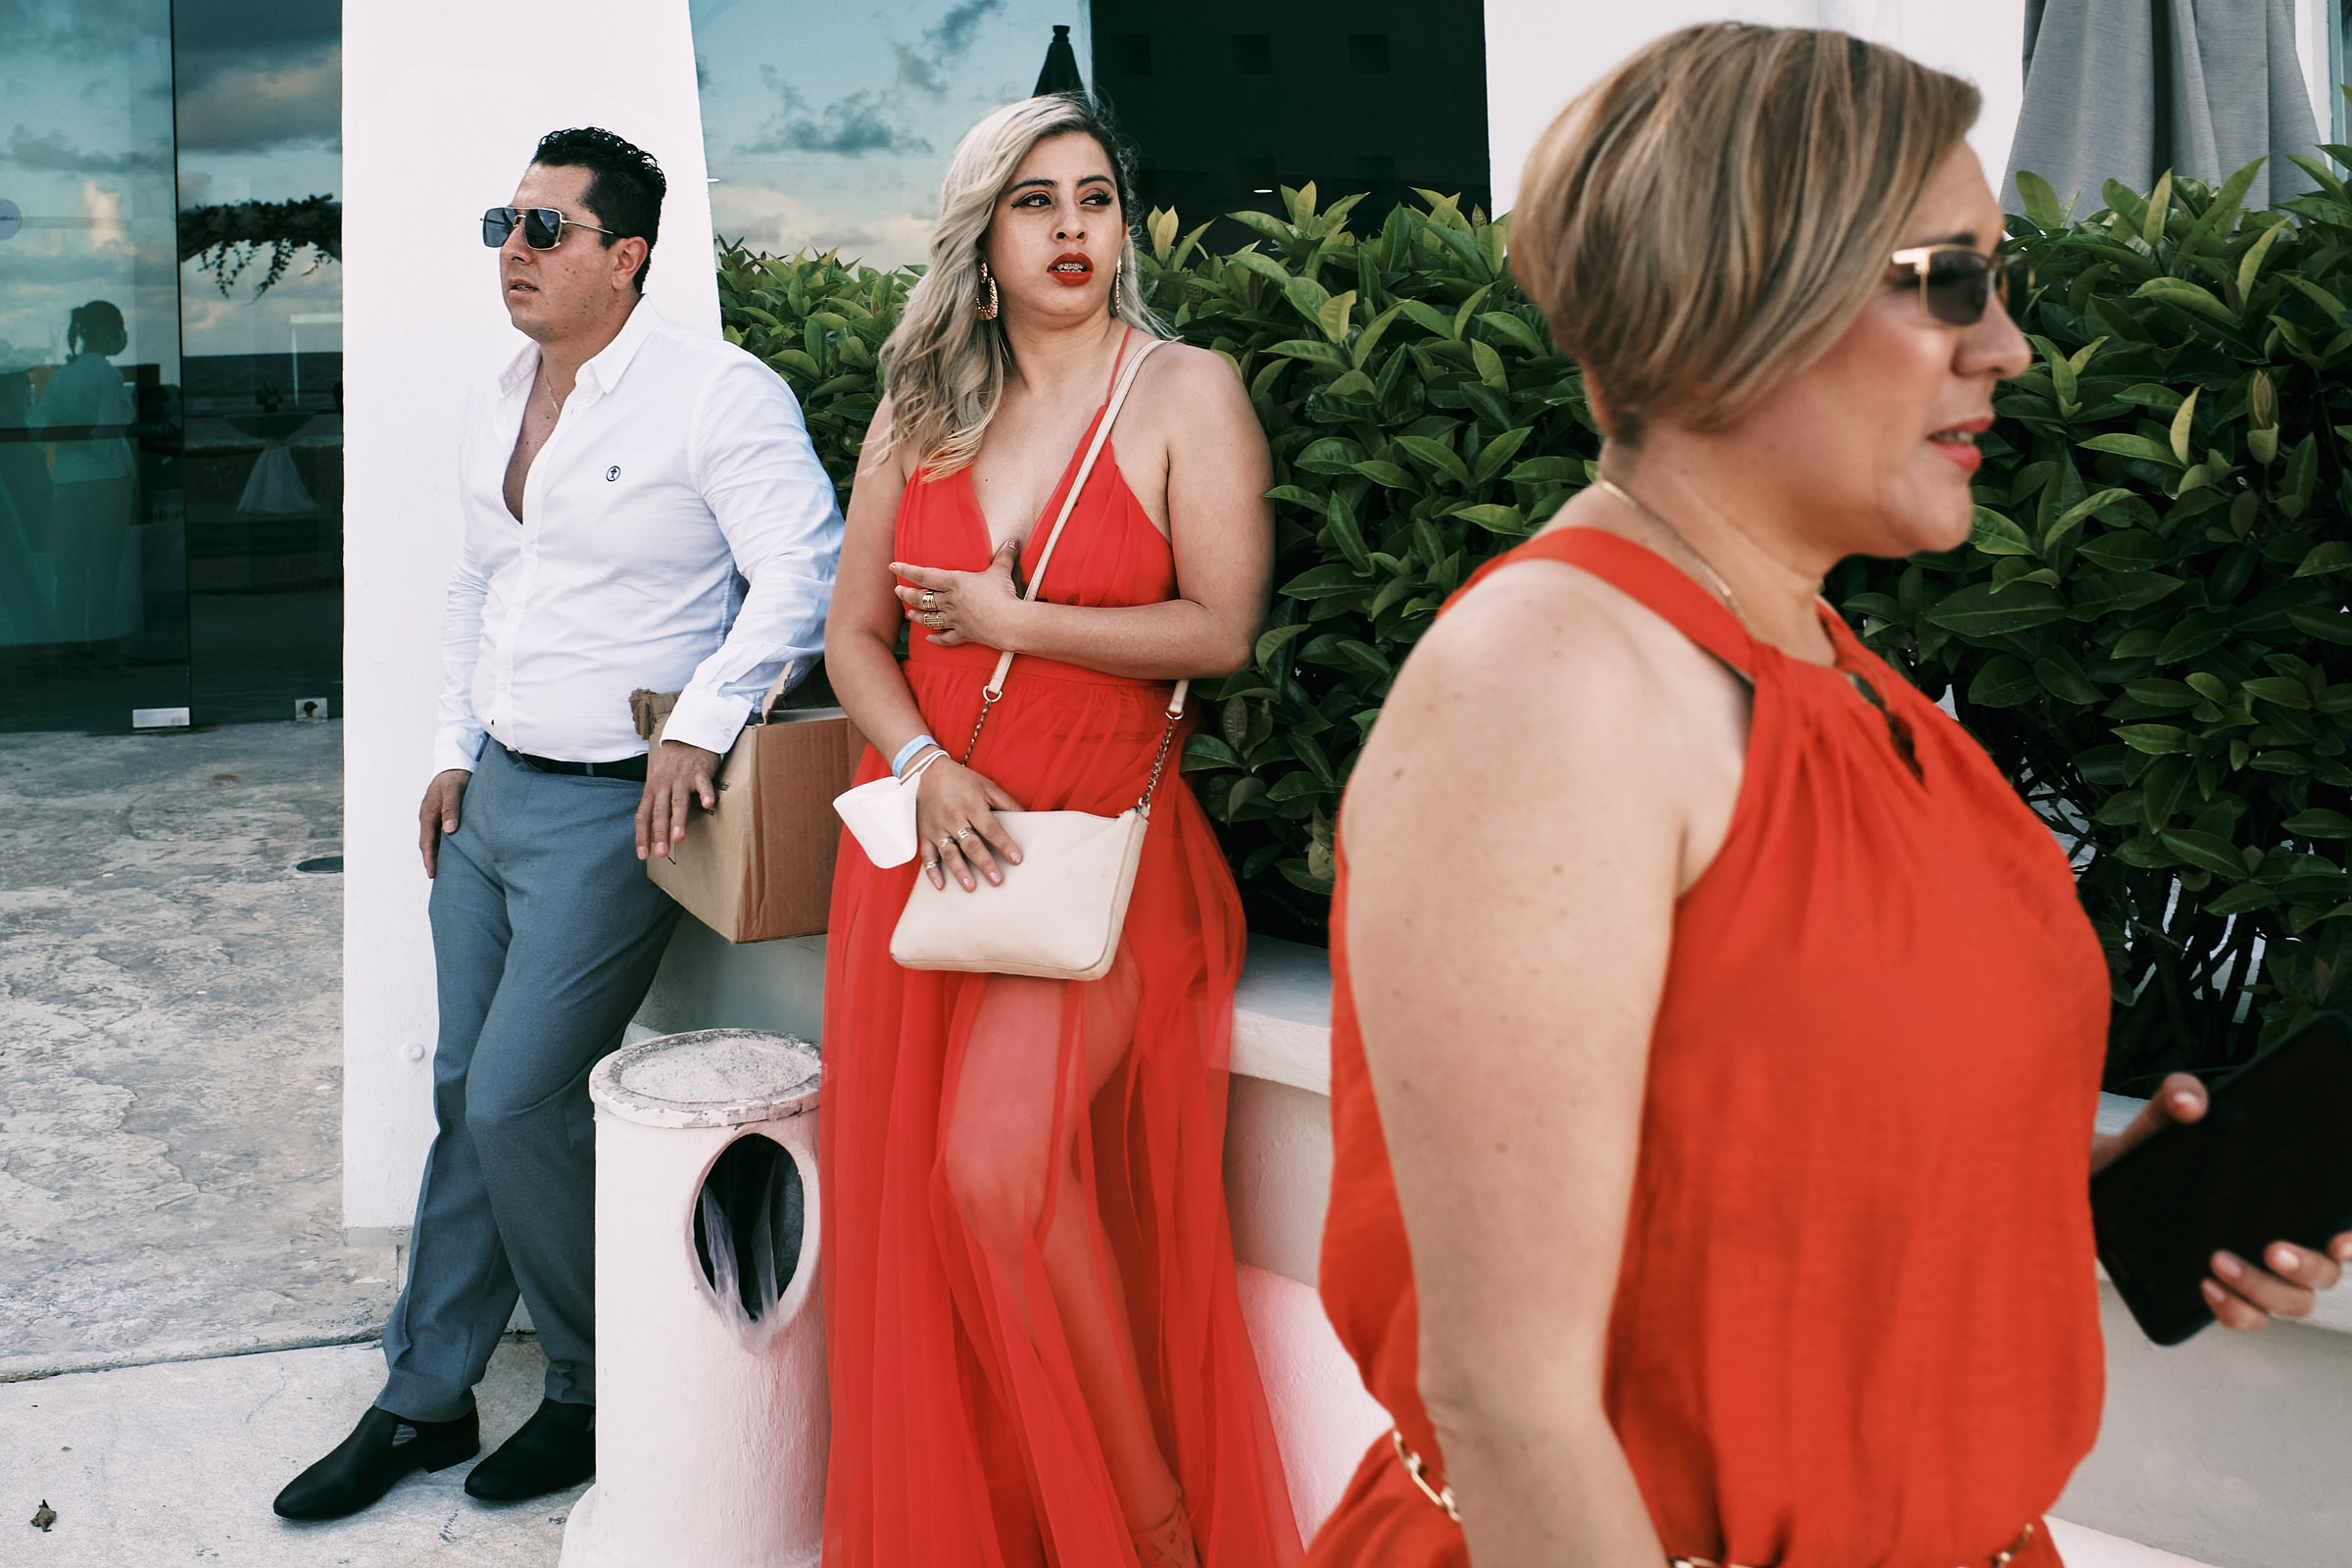 Guests In Red At Destination Wedding In Mexico